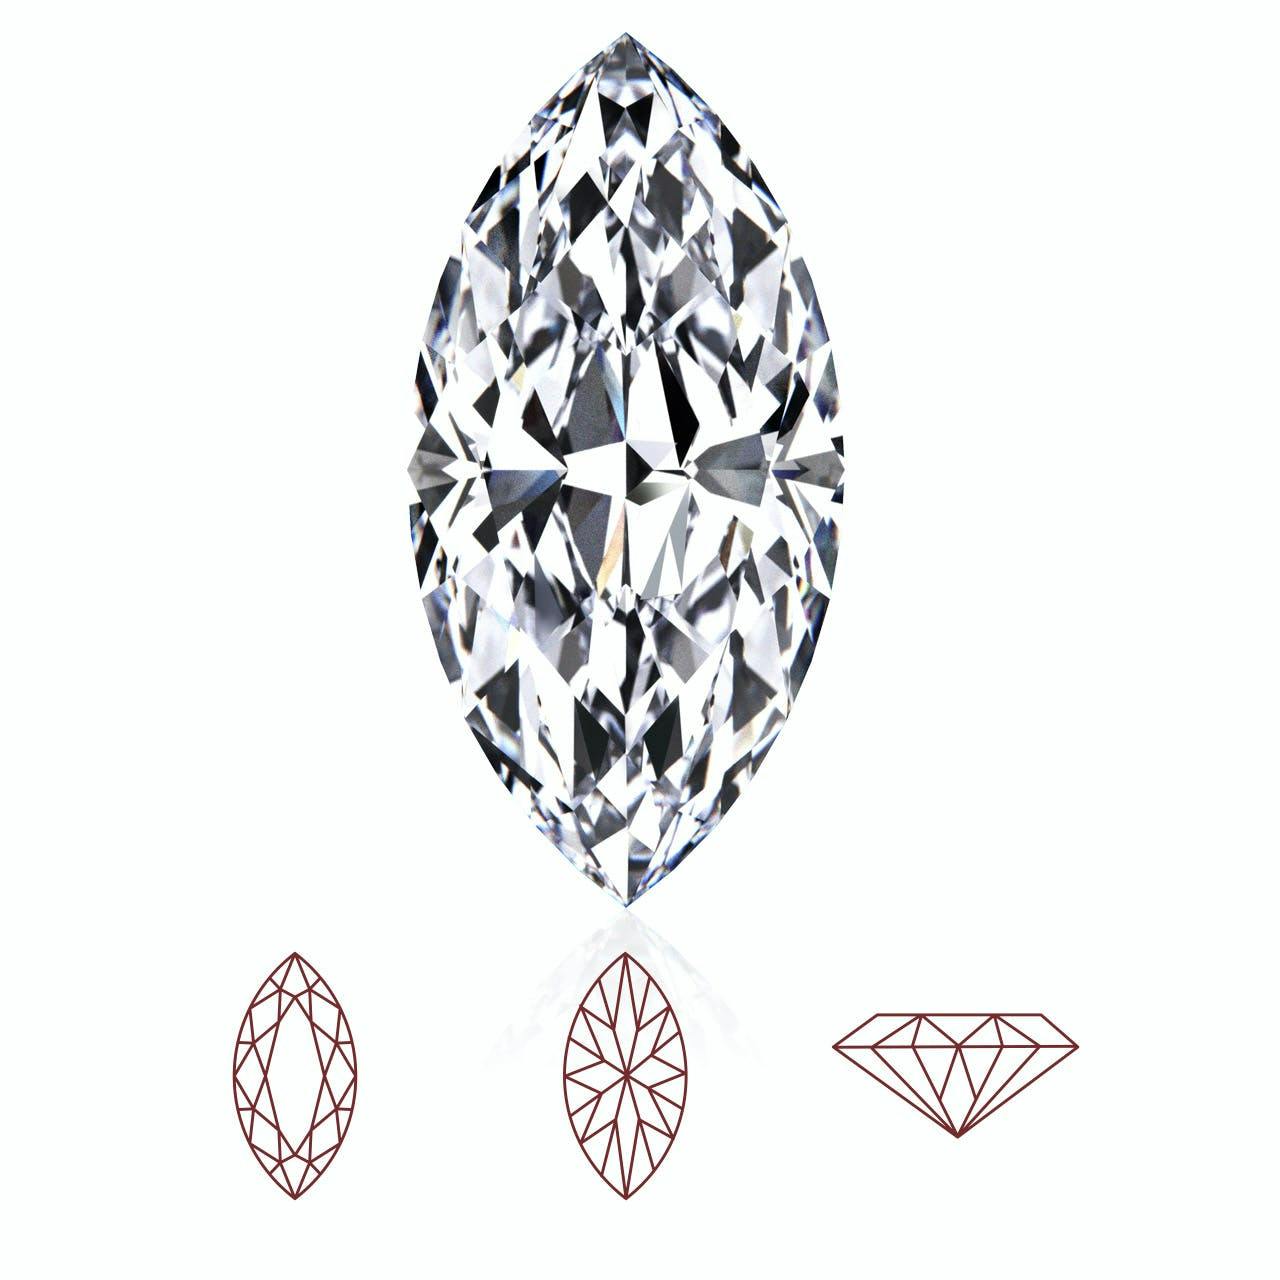 Marquise cut among different types of diamond cut from different angles